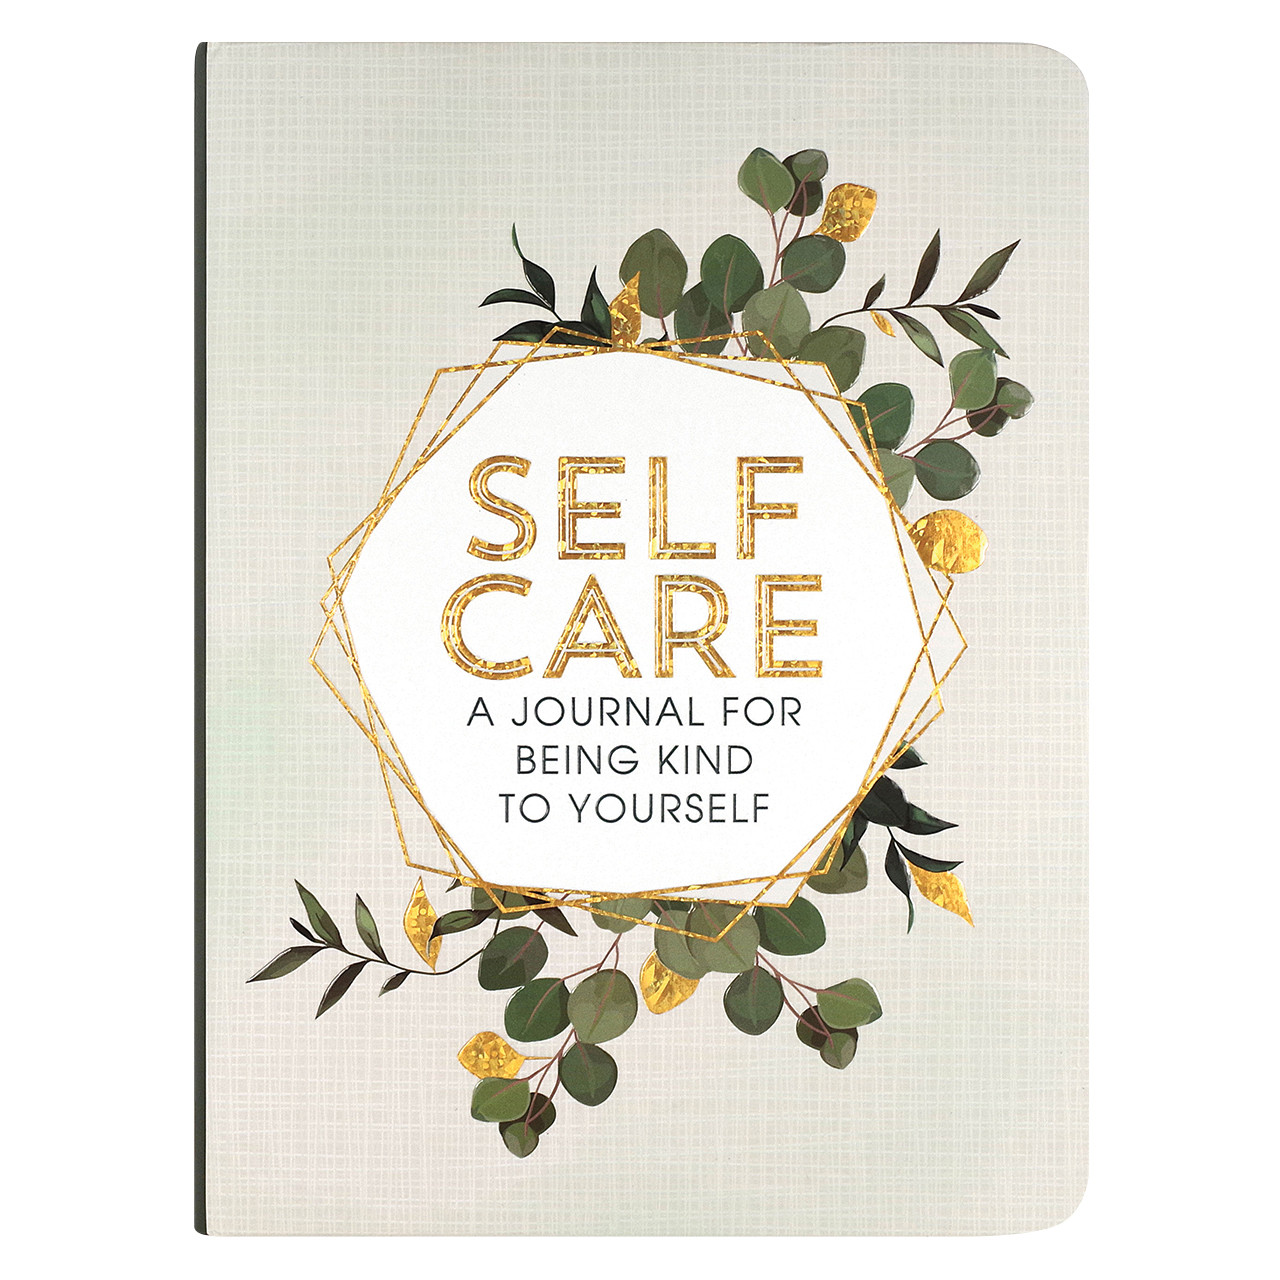 Self Care Guided Journal